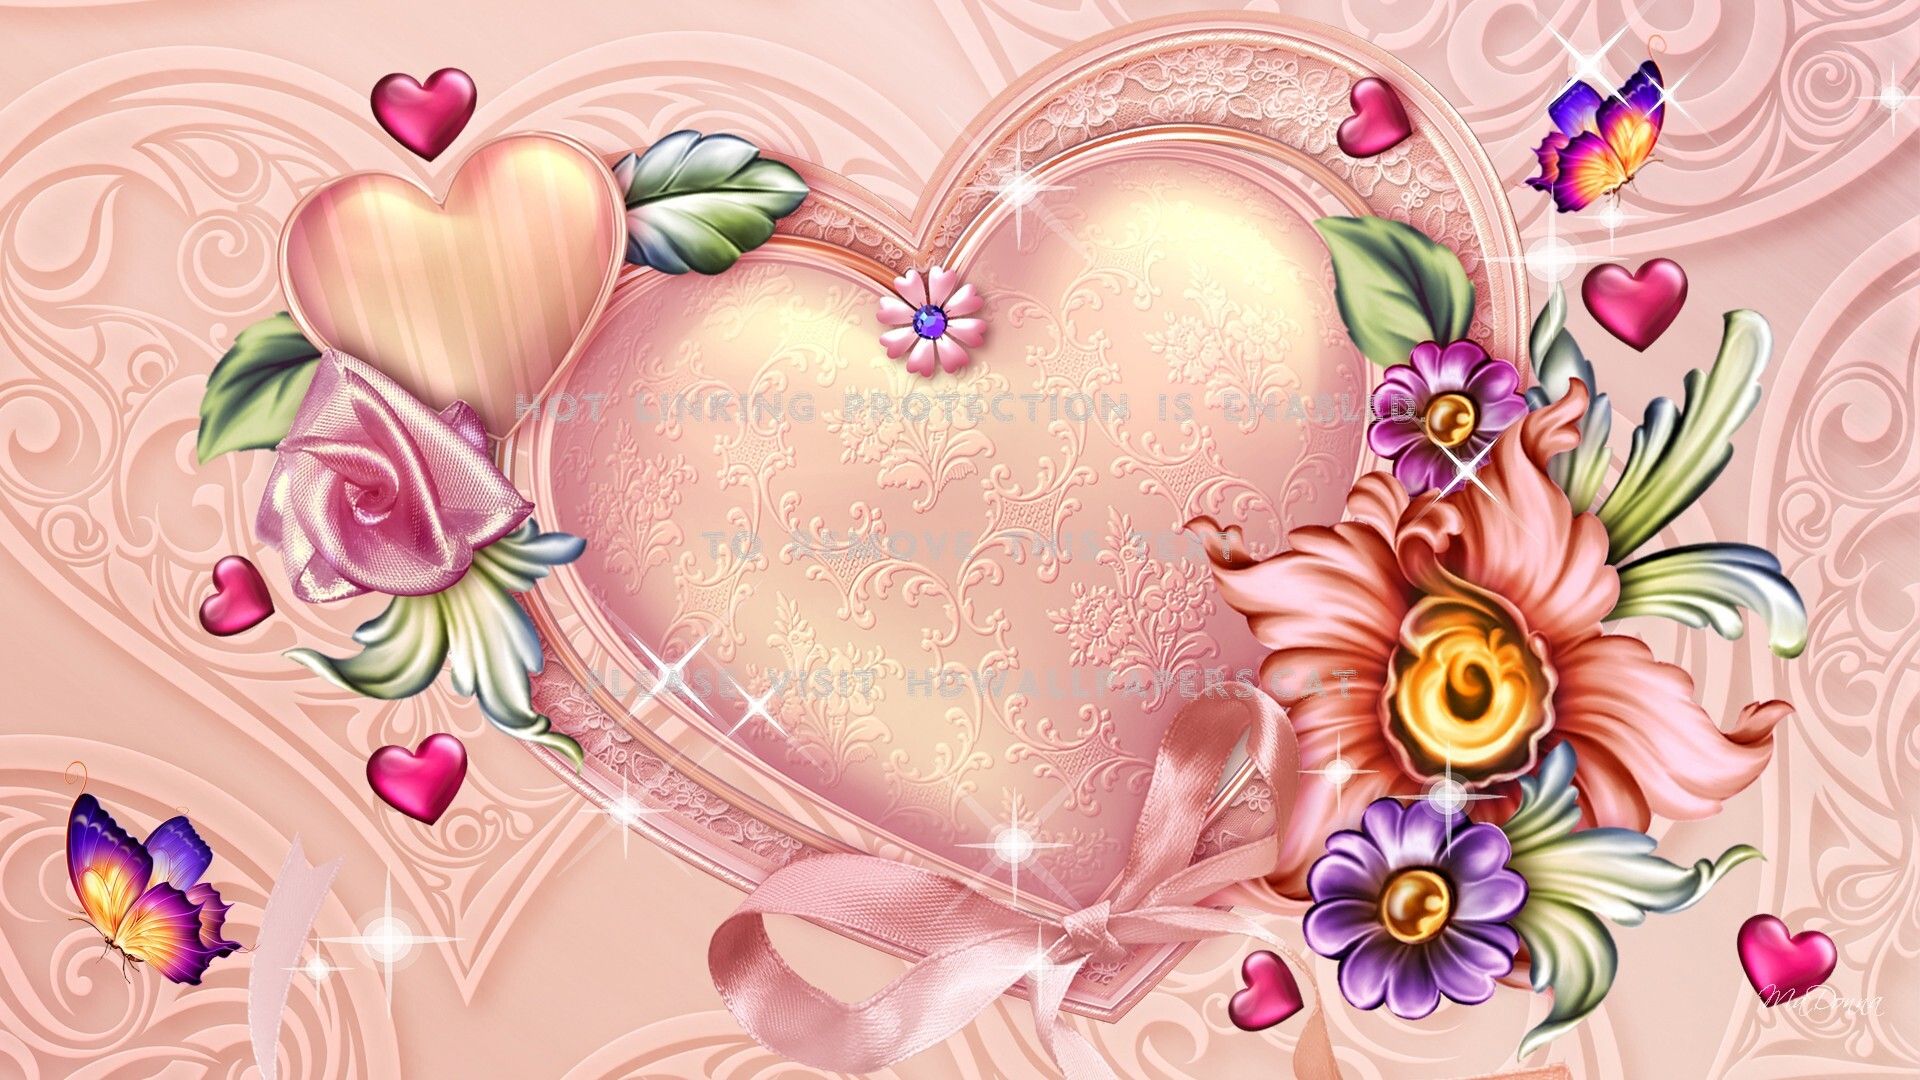 heart of your own valentines day floralhdwallpaper.cat